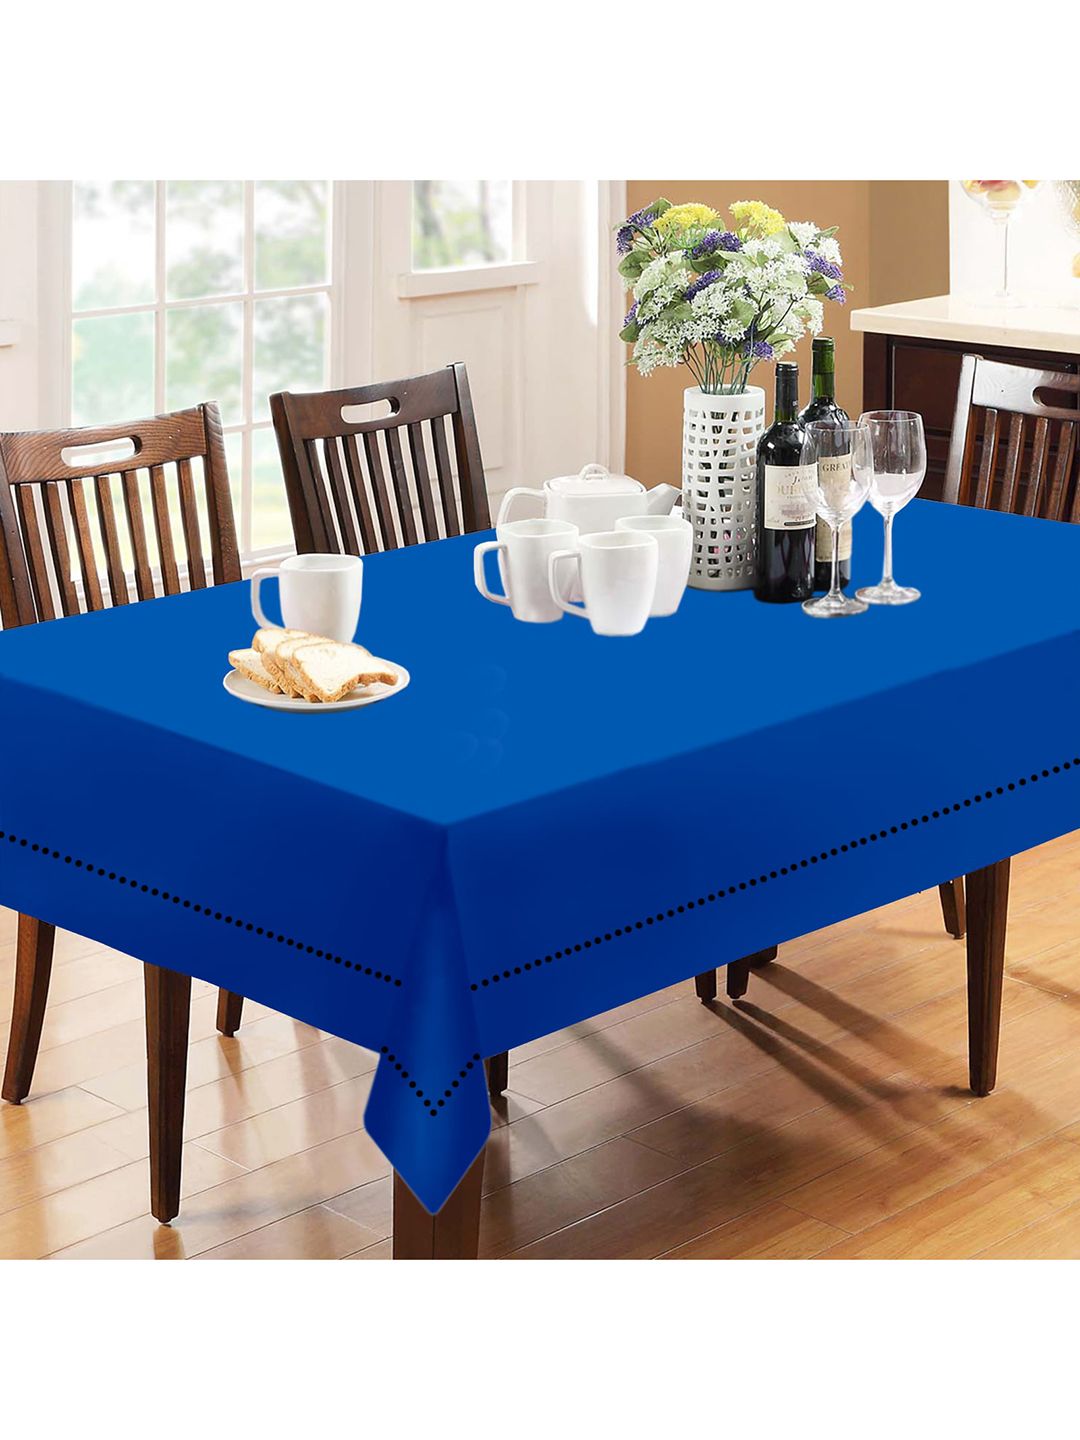 Lushomes 8 Seater Blue Table Cover Price in India